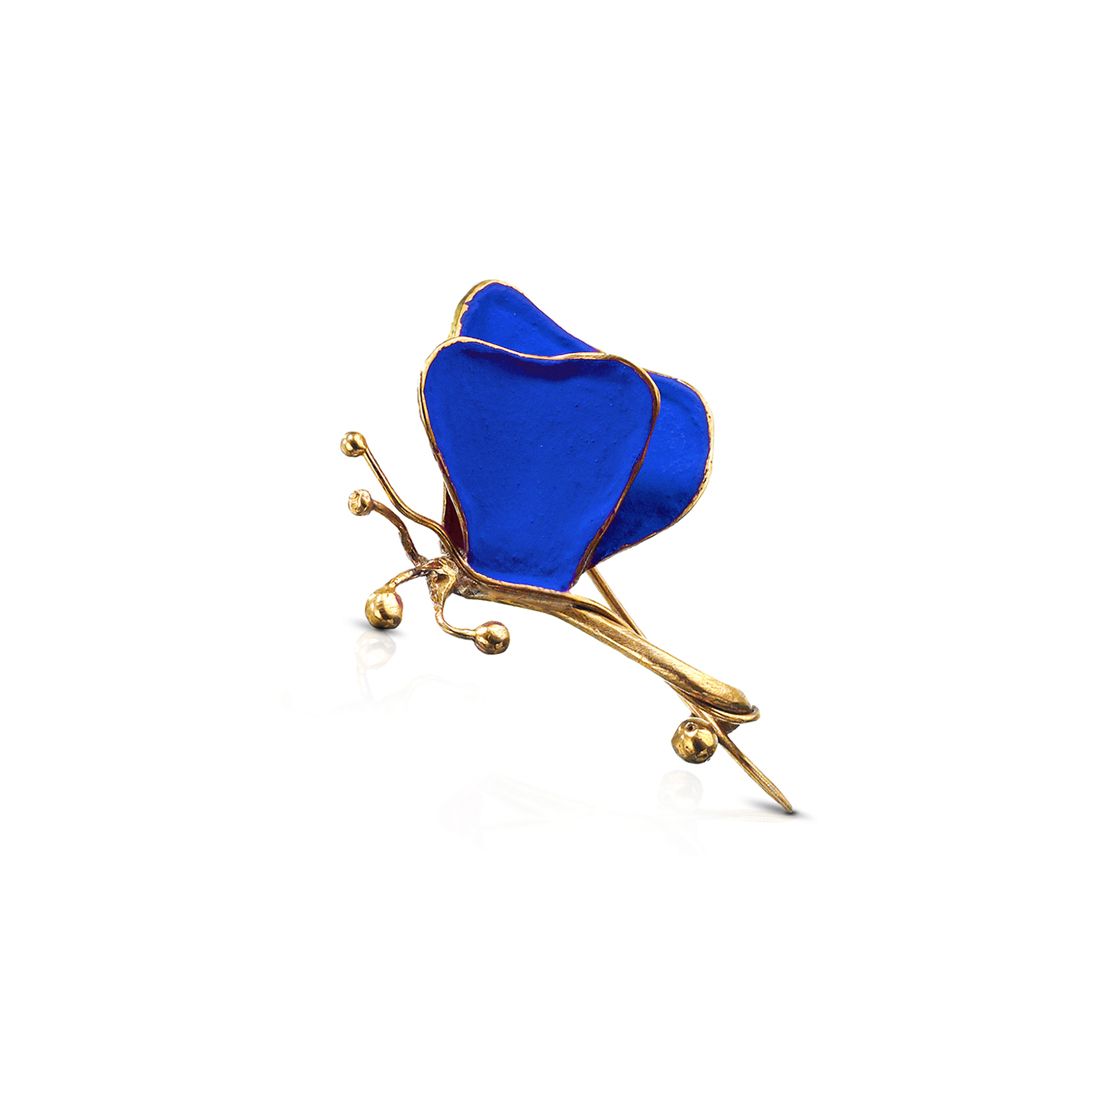 Blue butterfly brooch with gold detail. Handpainted with natural pigments, with a velvet finish.